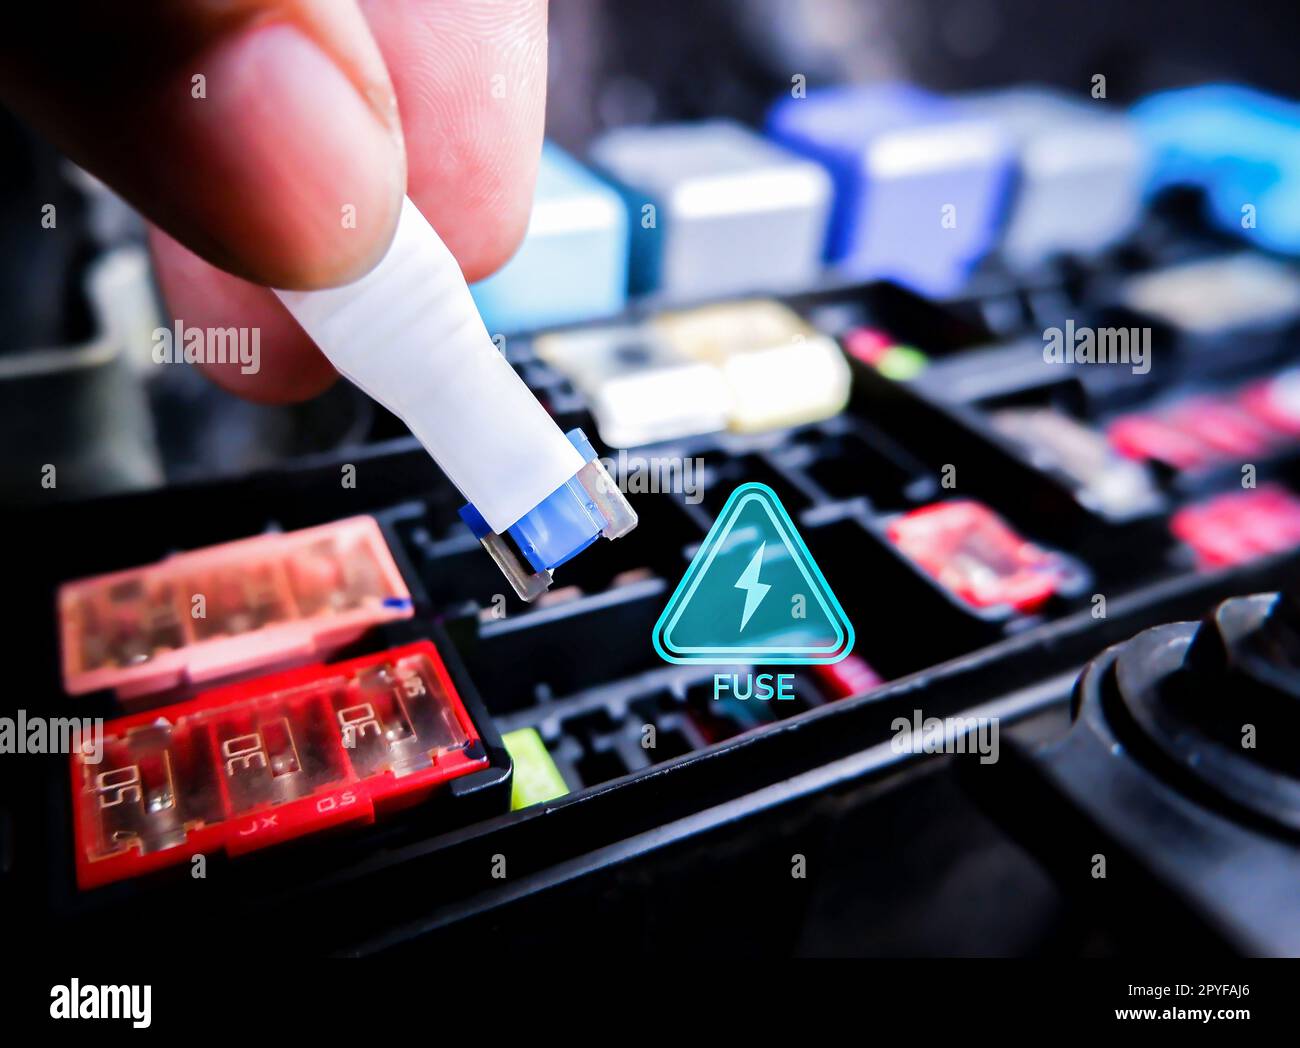 Close up of mini fuse for electric car system with a voltage caution symbol and fuse box on blurred background, automotive parts concept. Stock Photo